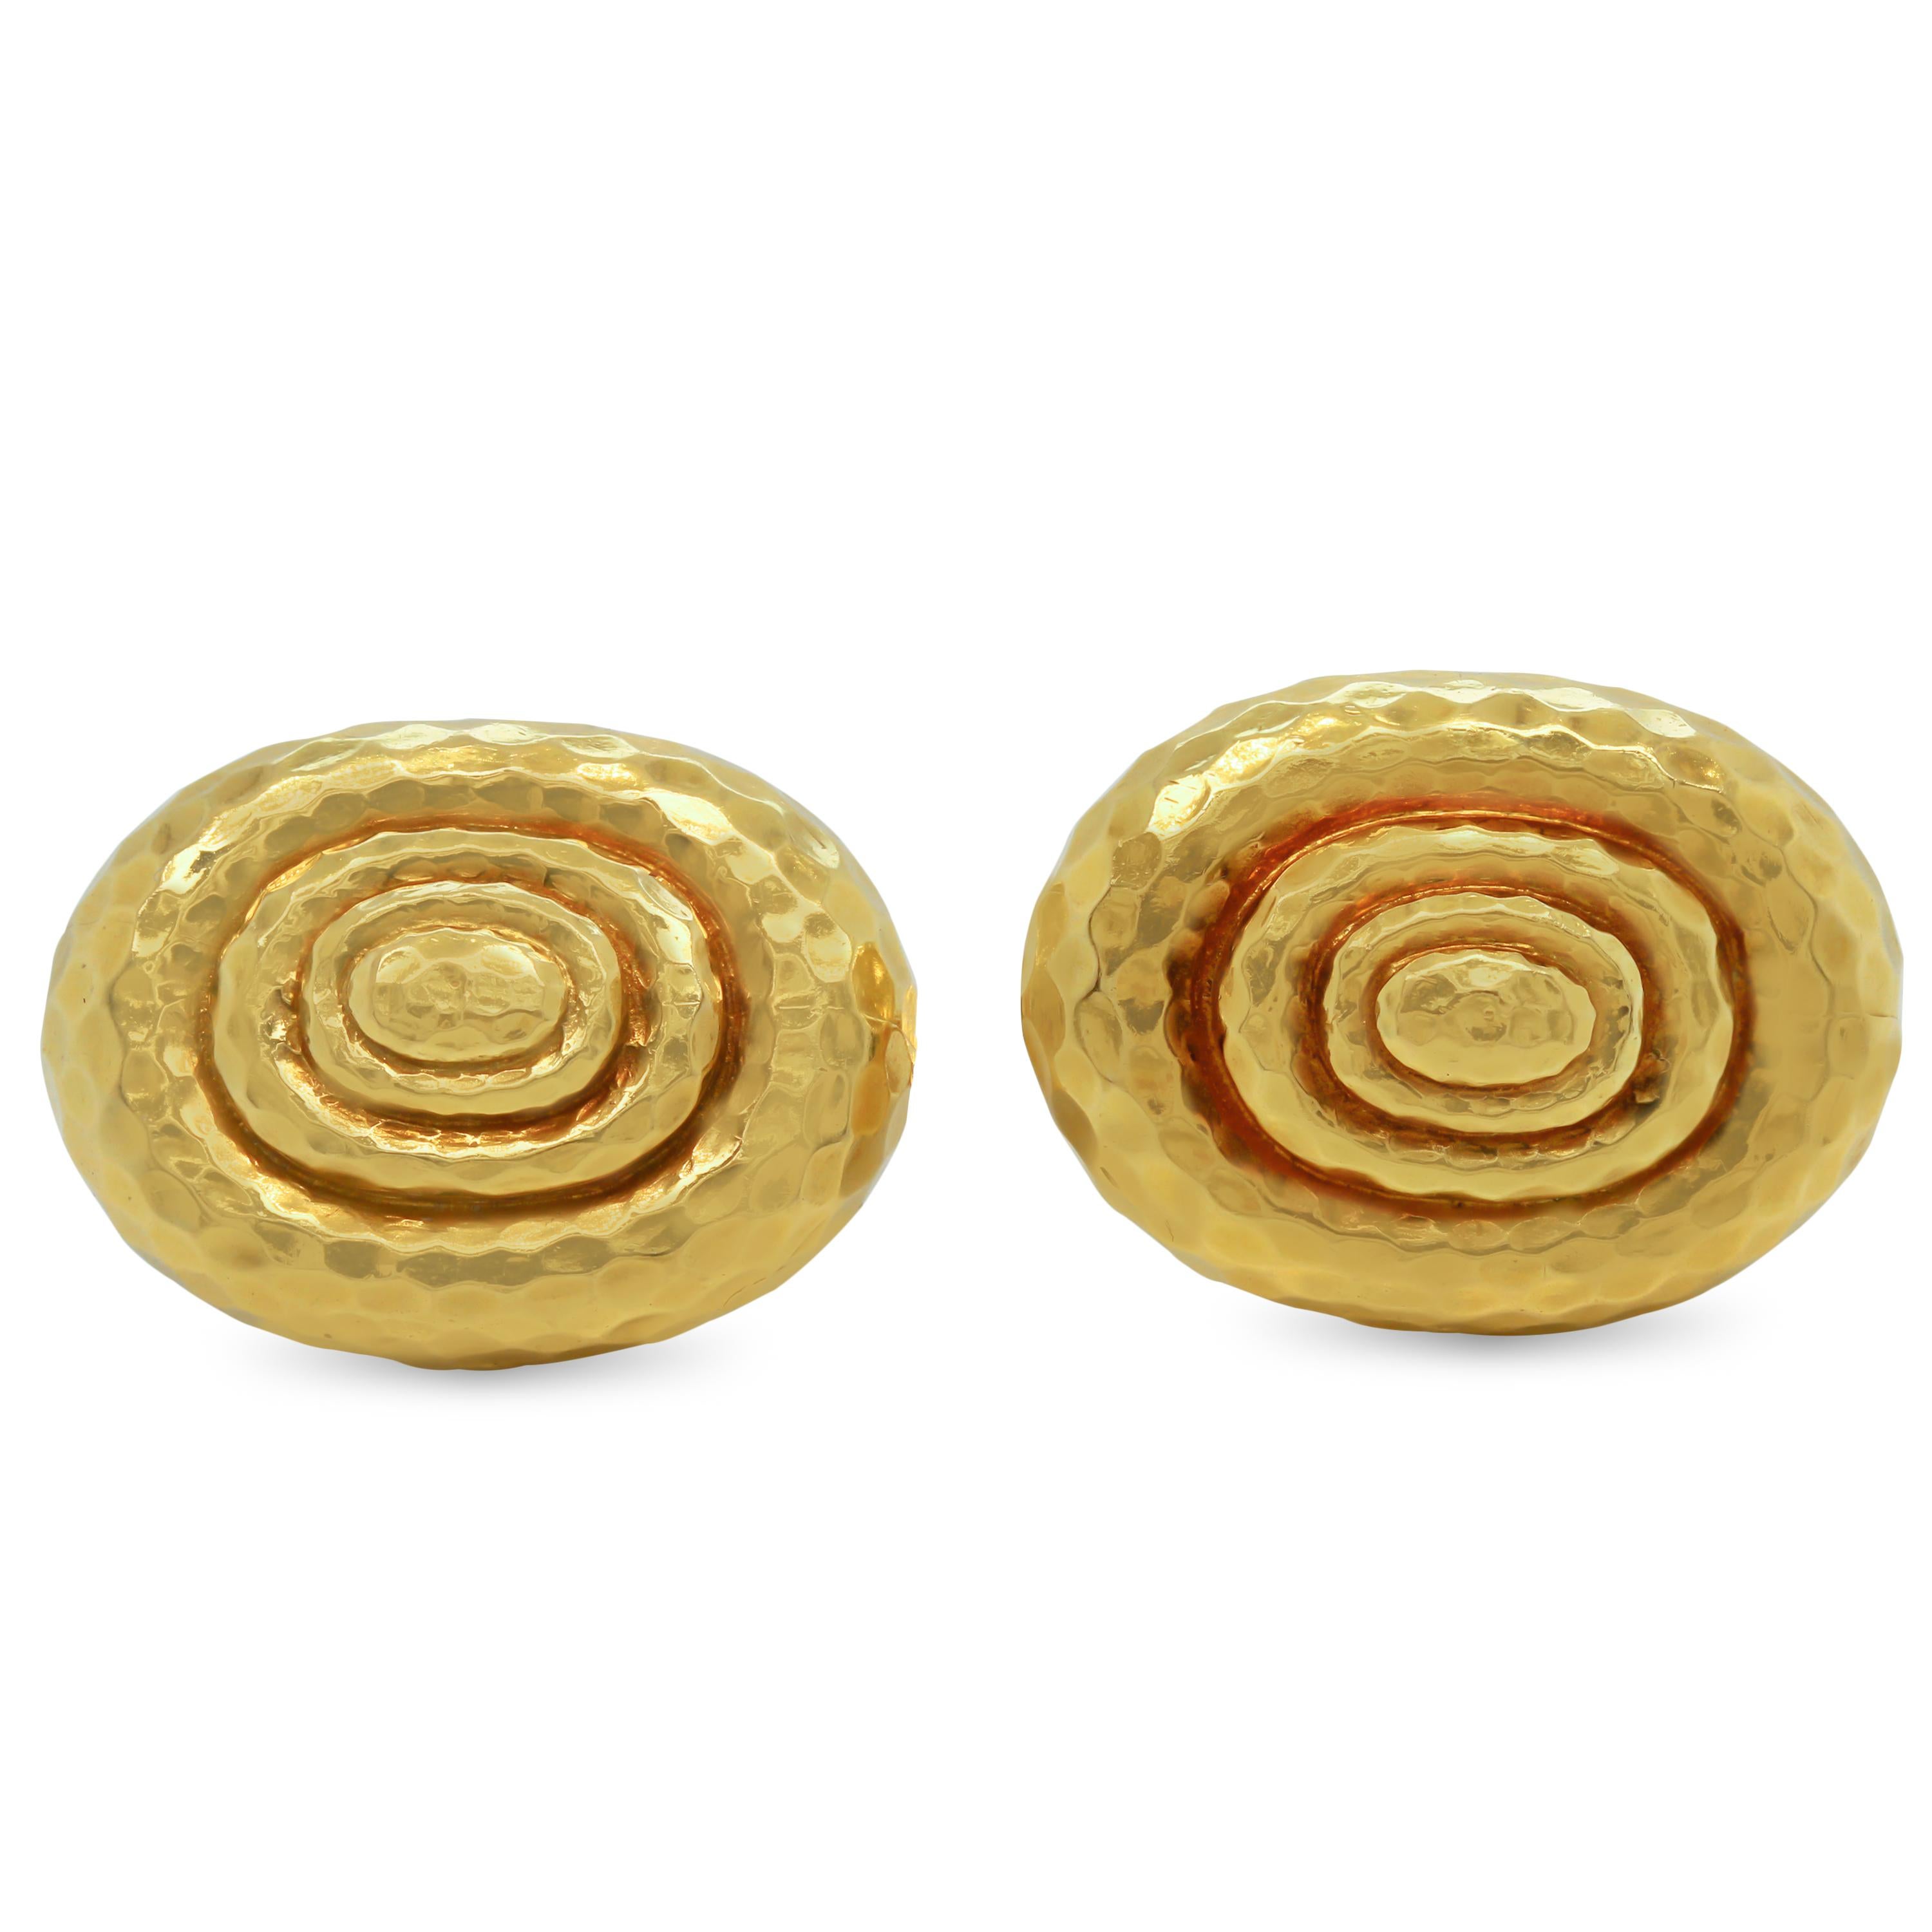 David Webb 18 Karat Yellow Gold Hammered Finish Mens Cufflinks

This pair of cufflinks by the famous, David Webb feature a hammered finish design crafted entirely in solid 18k gold.

Cufflinks measure 0.96 inch by 0.72 inch

Signed Webb 18K